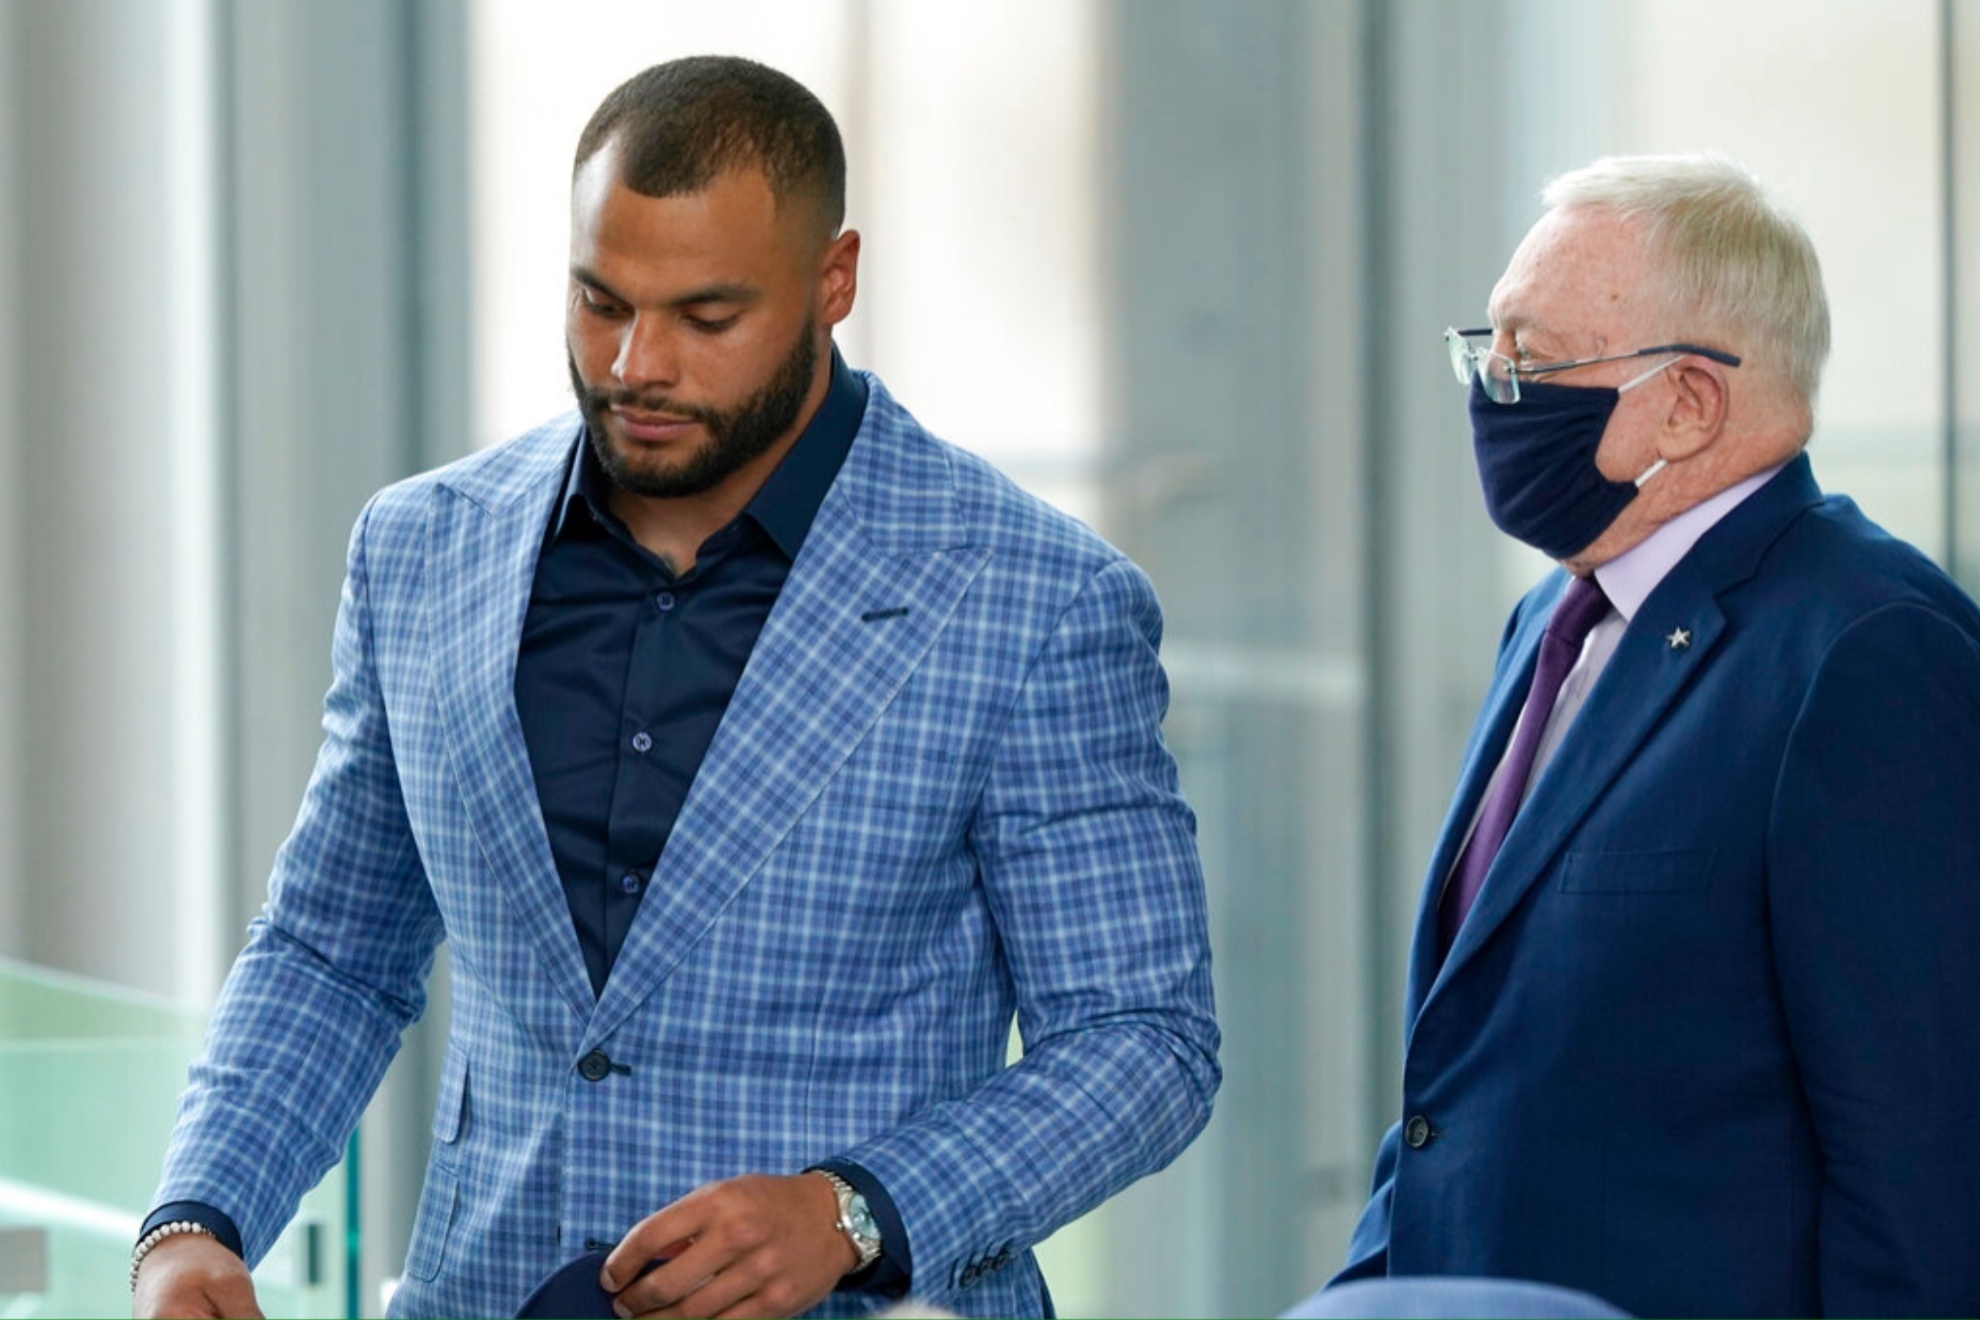 Dak Prescott (R) and Jerry Jones back in 2021, when the QB signed his contract extensin.